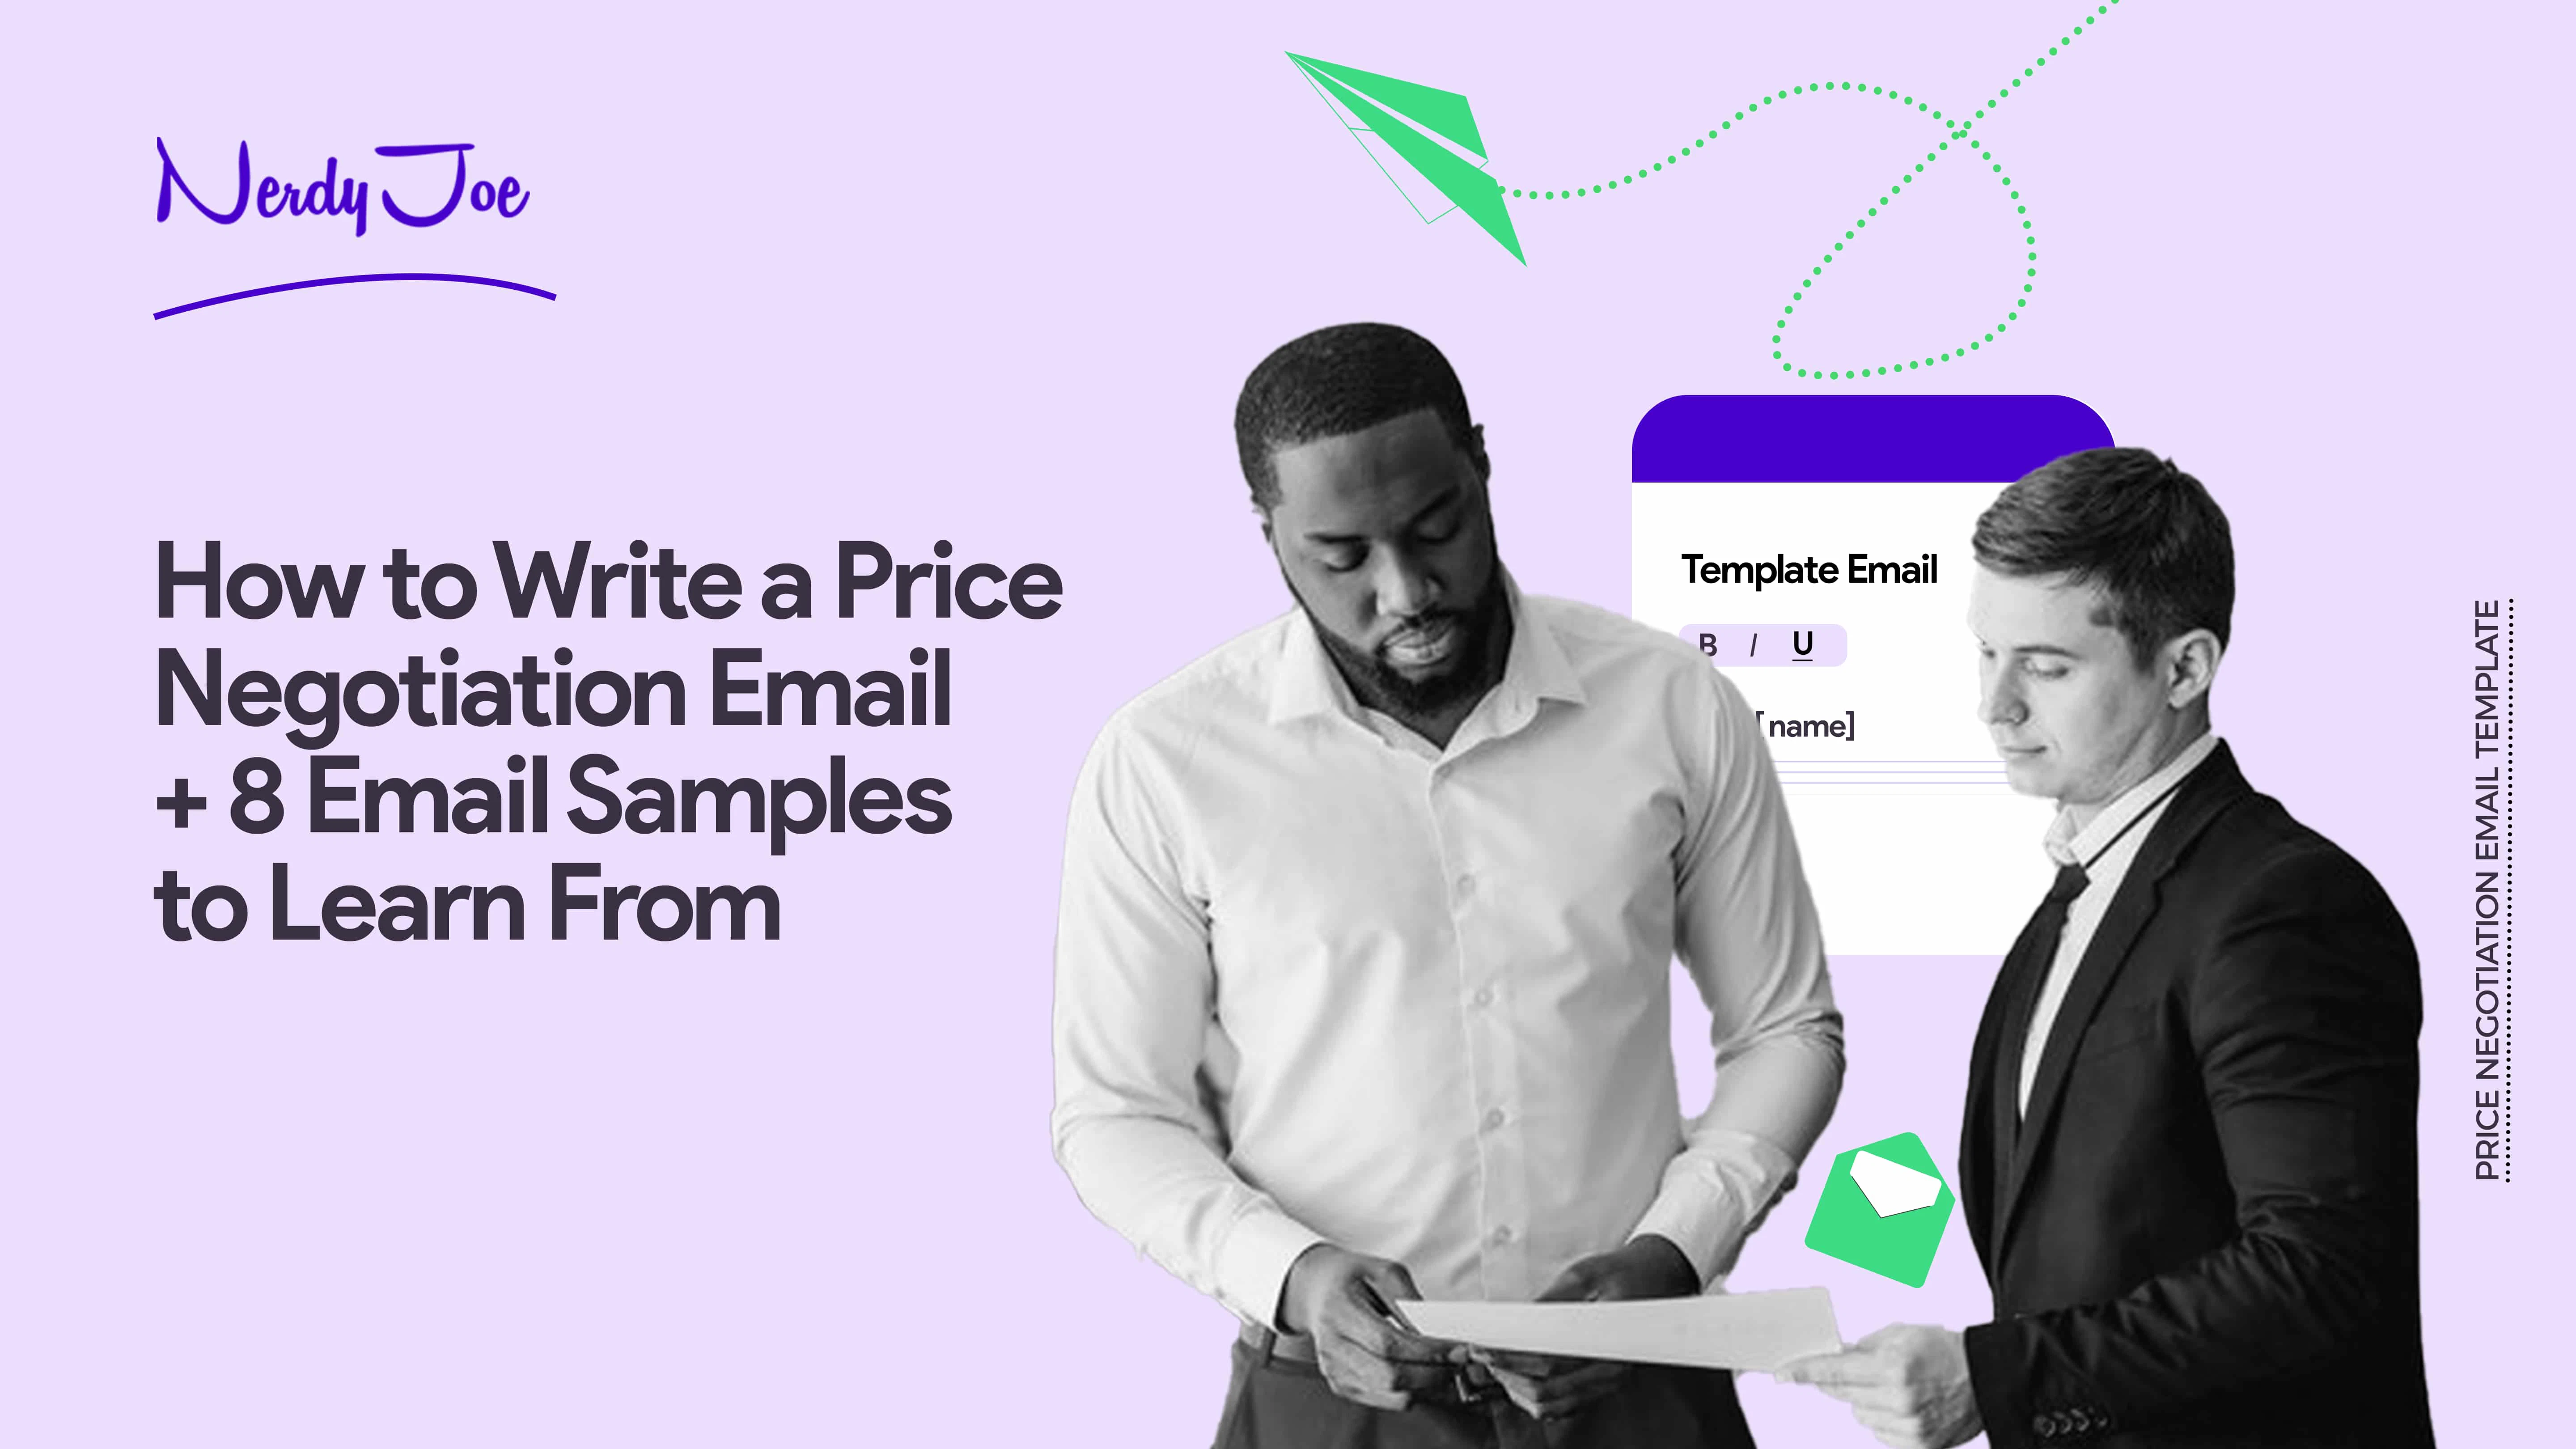 How to Write a Price Negotiation Email With 8 Templates